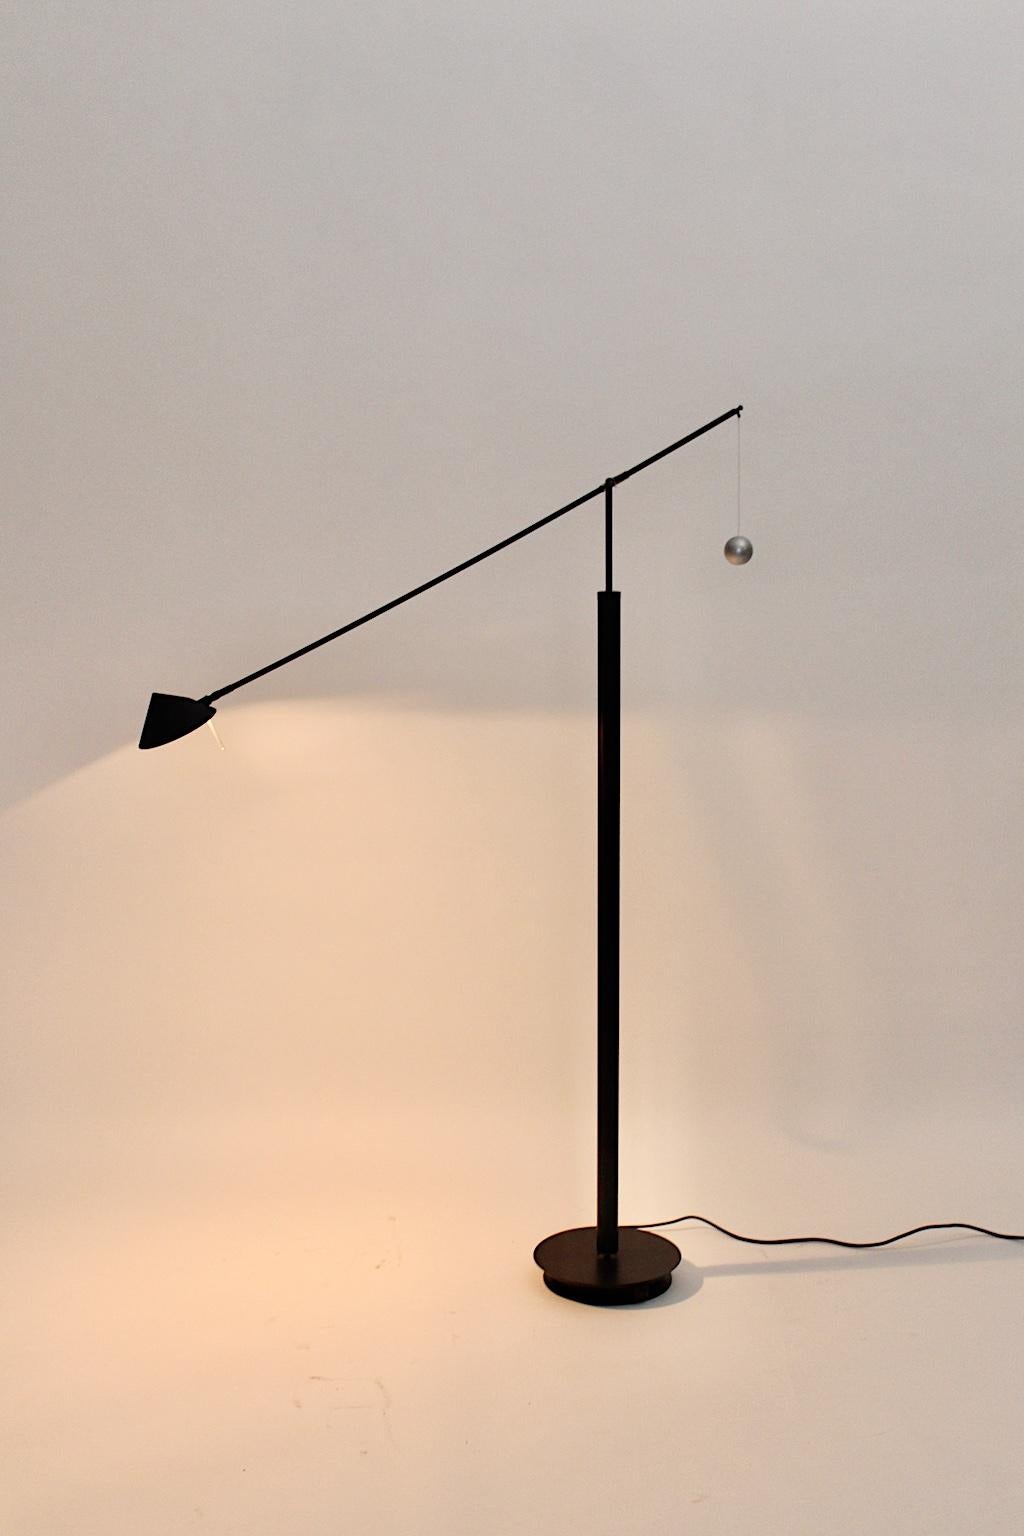 Italian Postmodern Vintage Black Floor Lamp by Carlo Forcolini 1989 for Artemide Italy For Sale